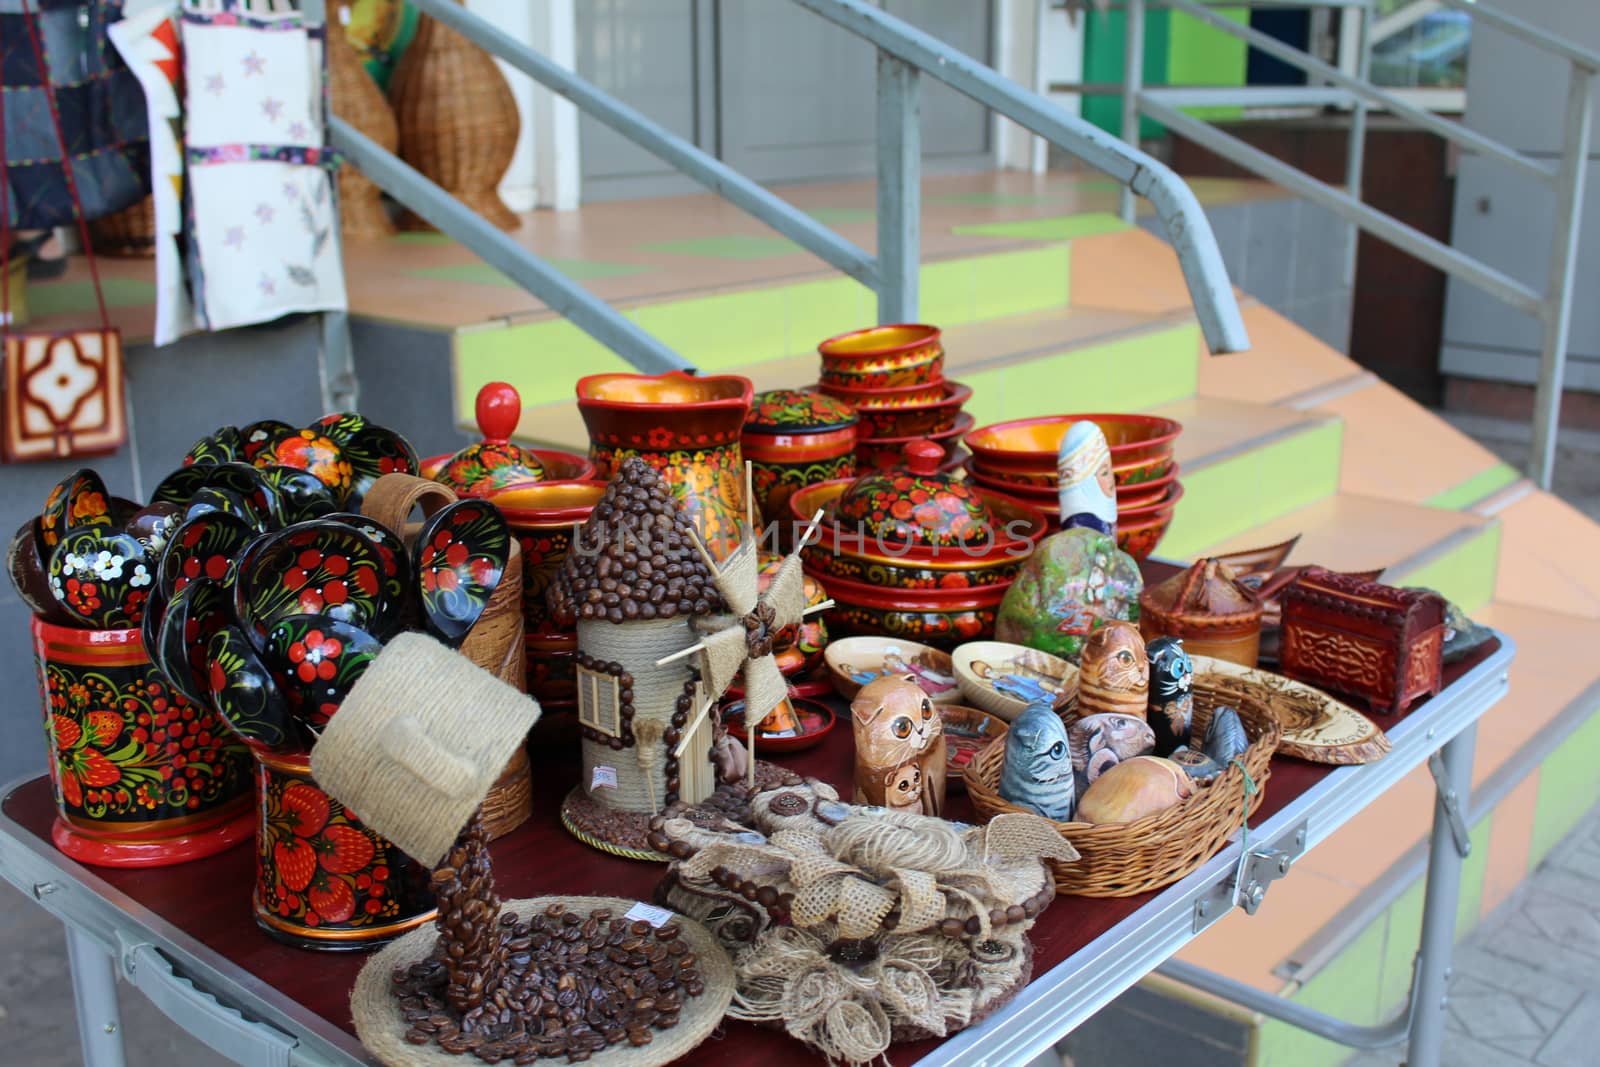 Handmade products on the table by nurjan100